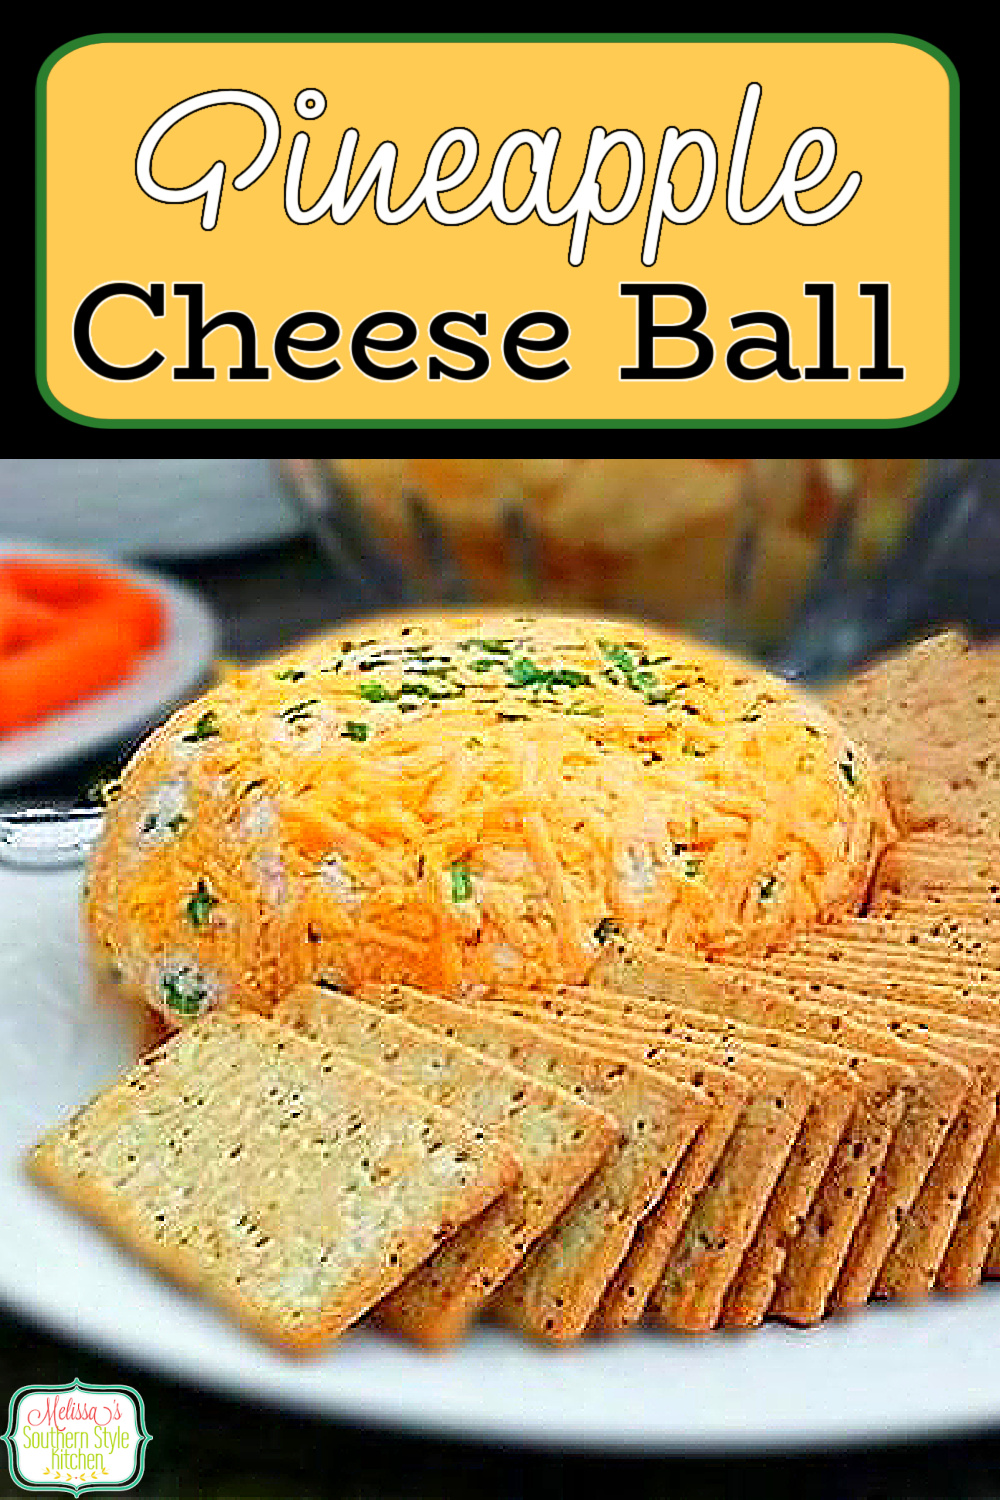 This easy Pineapple Cheeseball has that sweet and savory vibe that makes it impossible to resist #pineapplecheeseball #cheeballrecipes #pineapple #cheese #holidayappetizers #easycheeseball #cheeseballrecipe #southernfood #footballfood #southernrecipes via @melissasssk